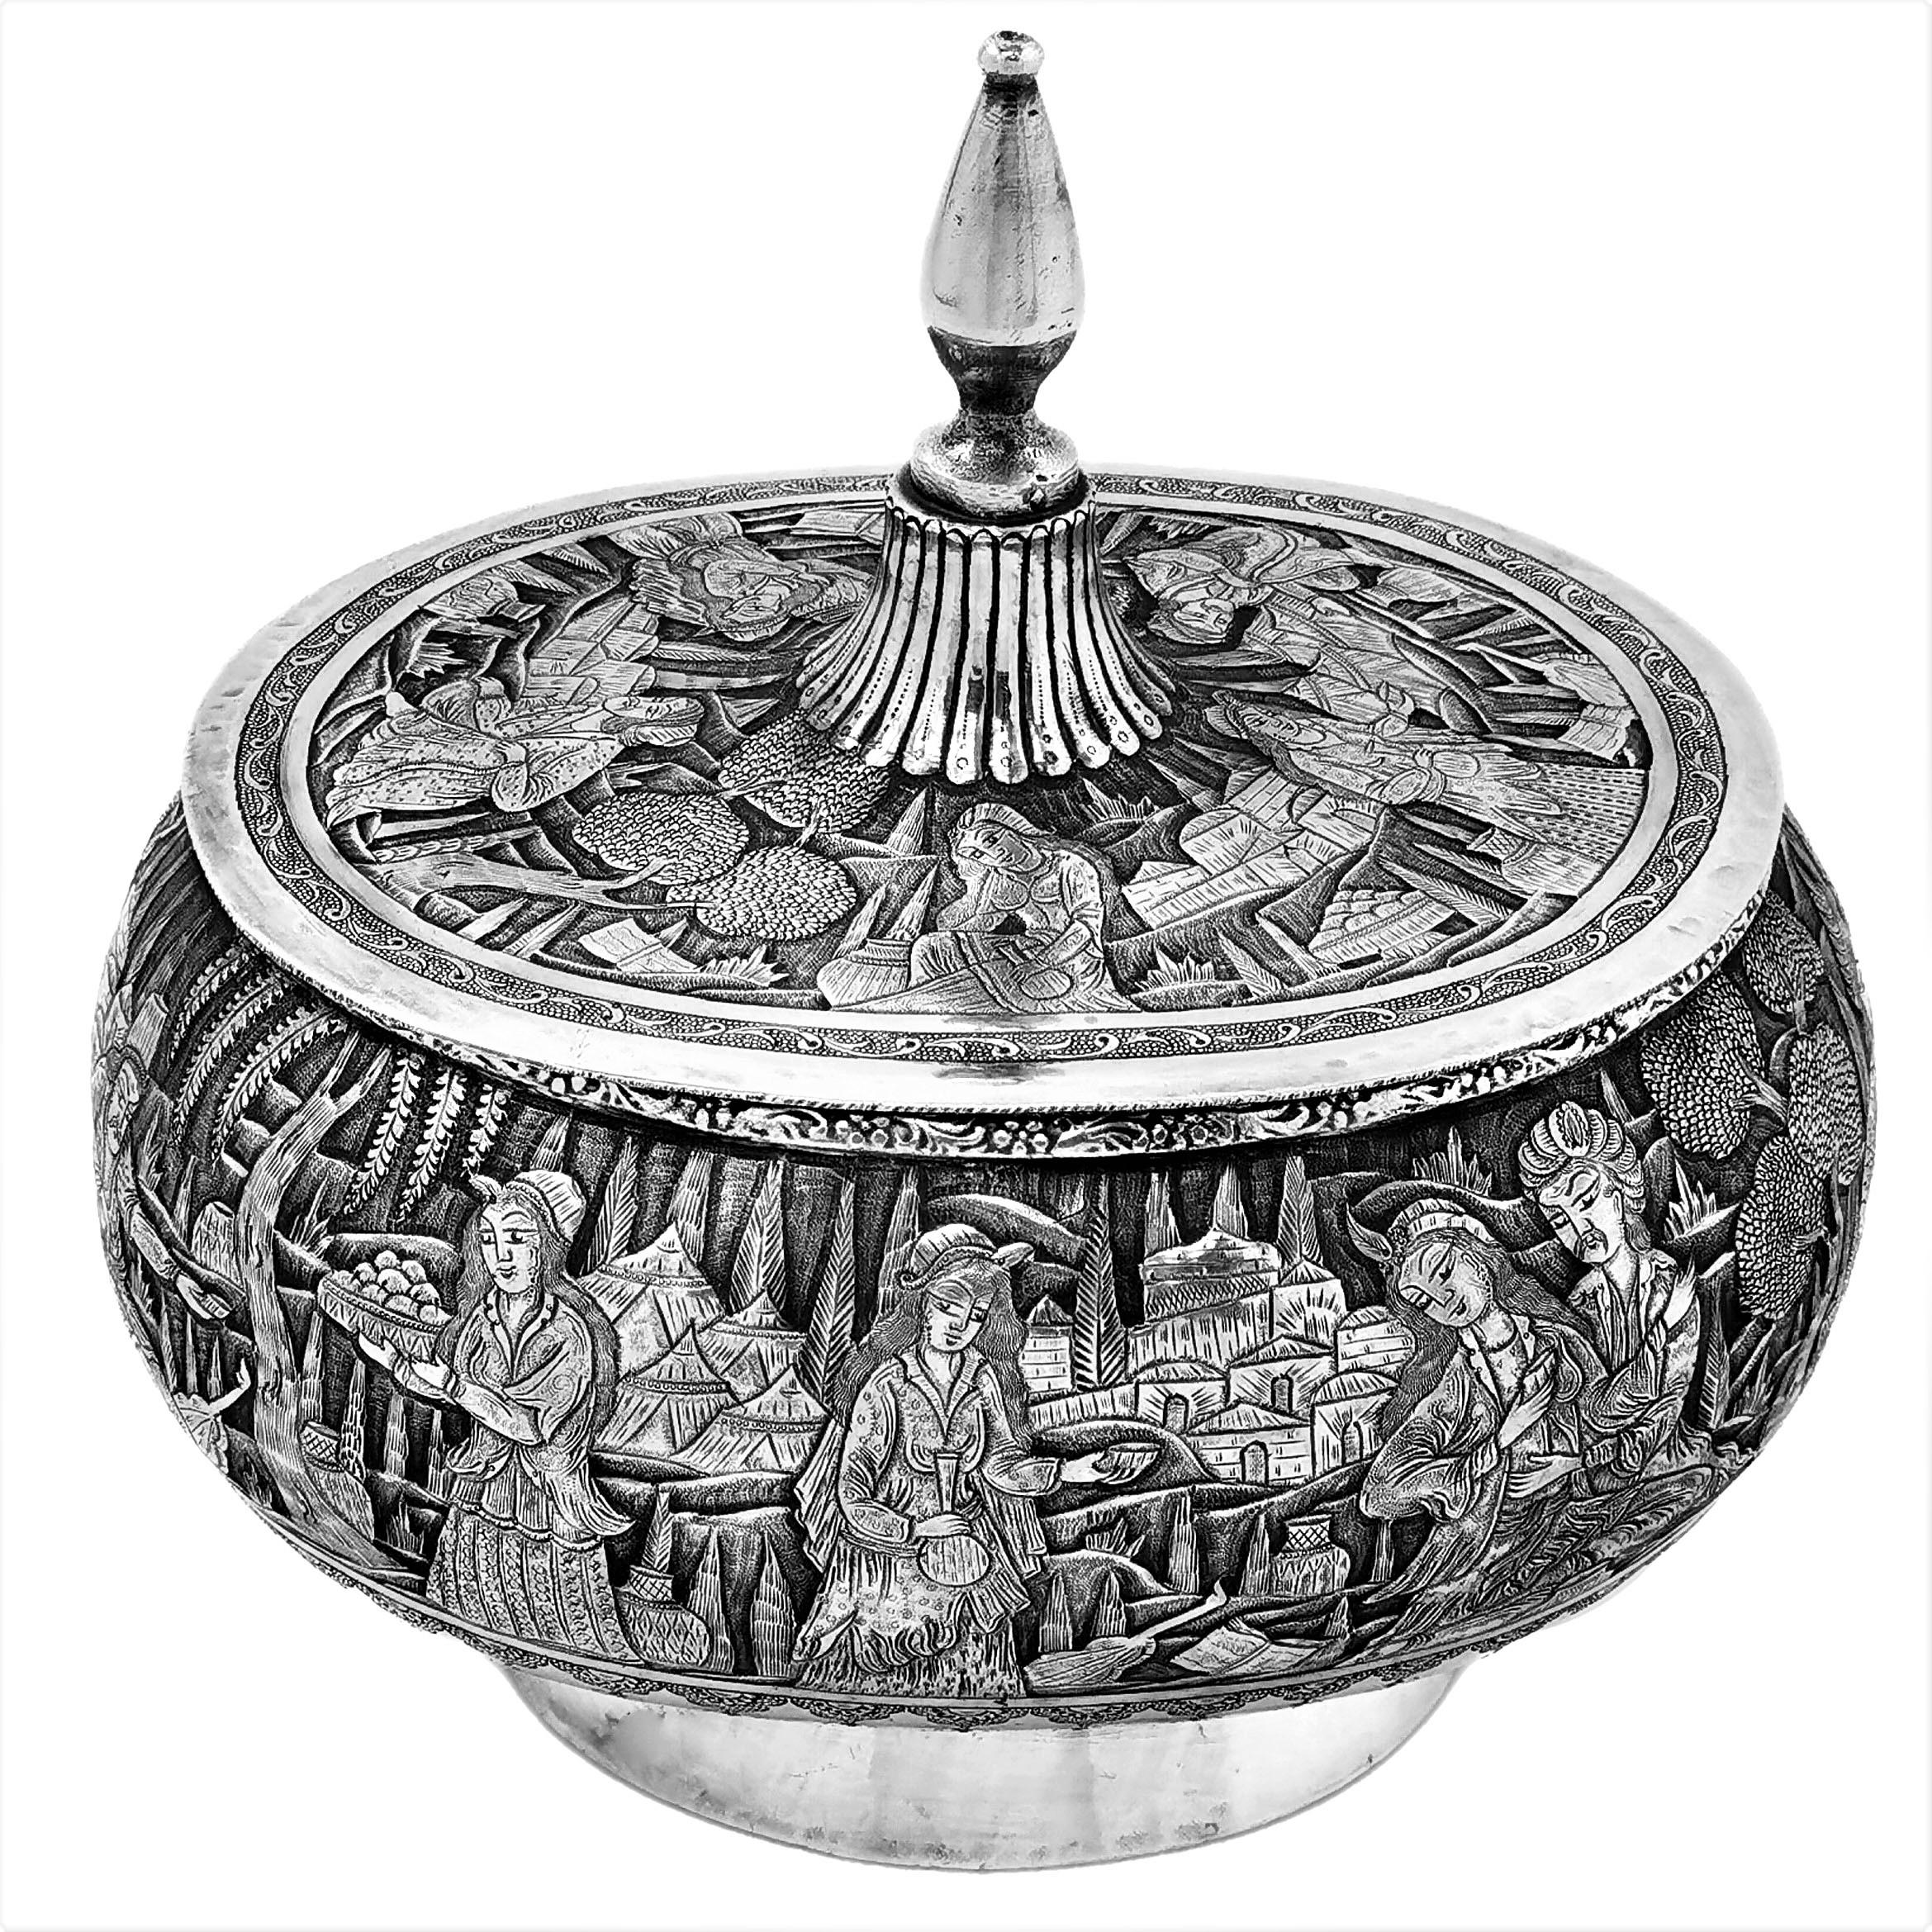 A beautiful vintage Persian solid Silver Lidded Container with an oval shape and a tall pointed lid. The body of the Box and the surface of the lid are embellished with rich, ornate chased designs showing figures in an out door setting with